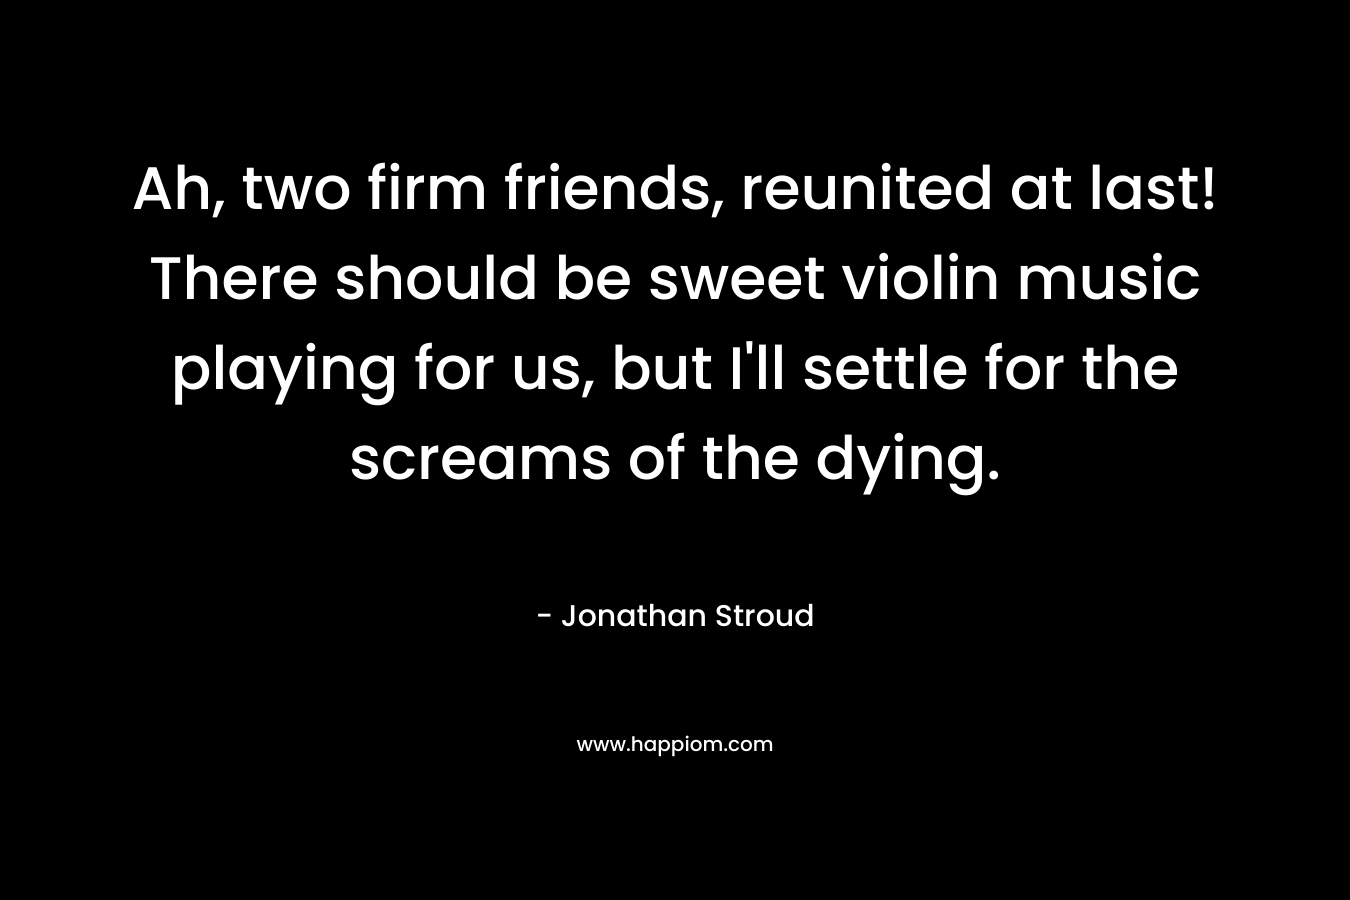 Ah, two firm friends, reunited at last! There should be sweet violin music playing for us, but I’ll settle for the screams of the dying. – Jonathan Stroud